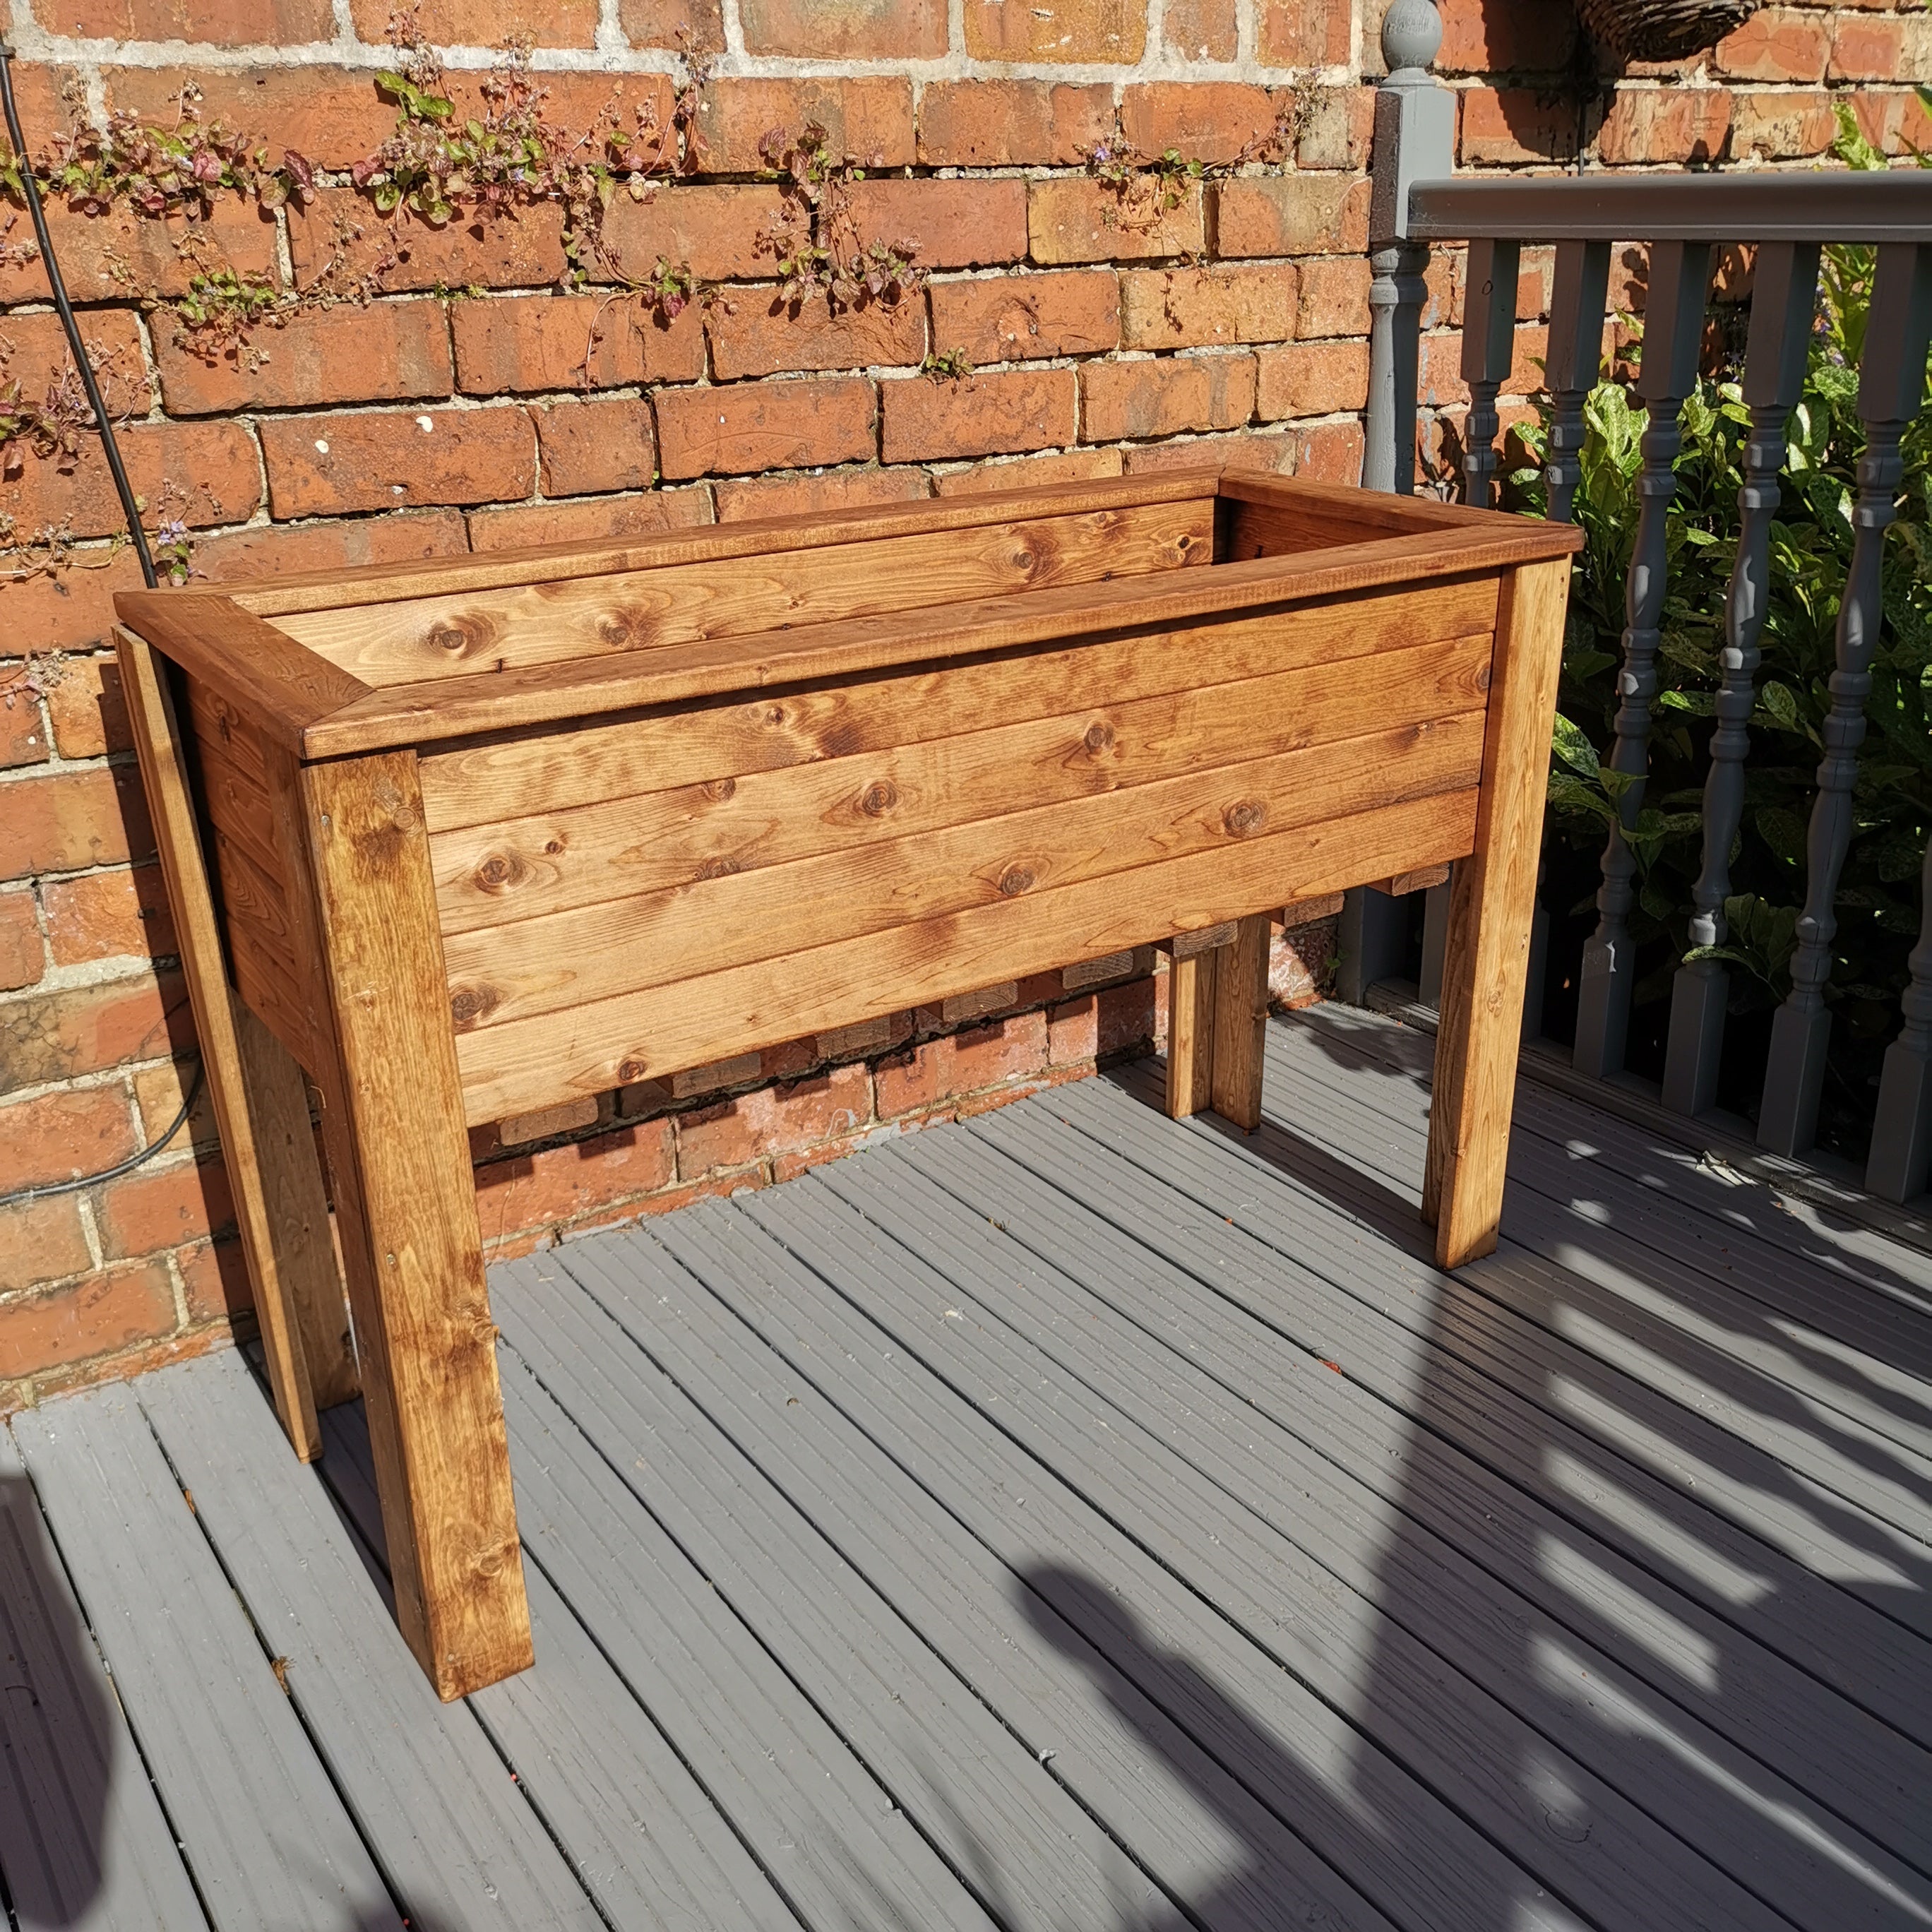 Hand Made Rustic Wooden Large Raised Garden Trough / Flower Bed Planter